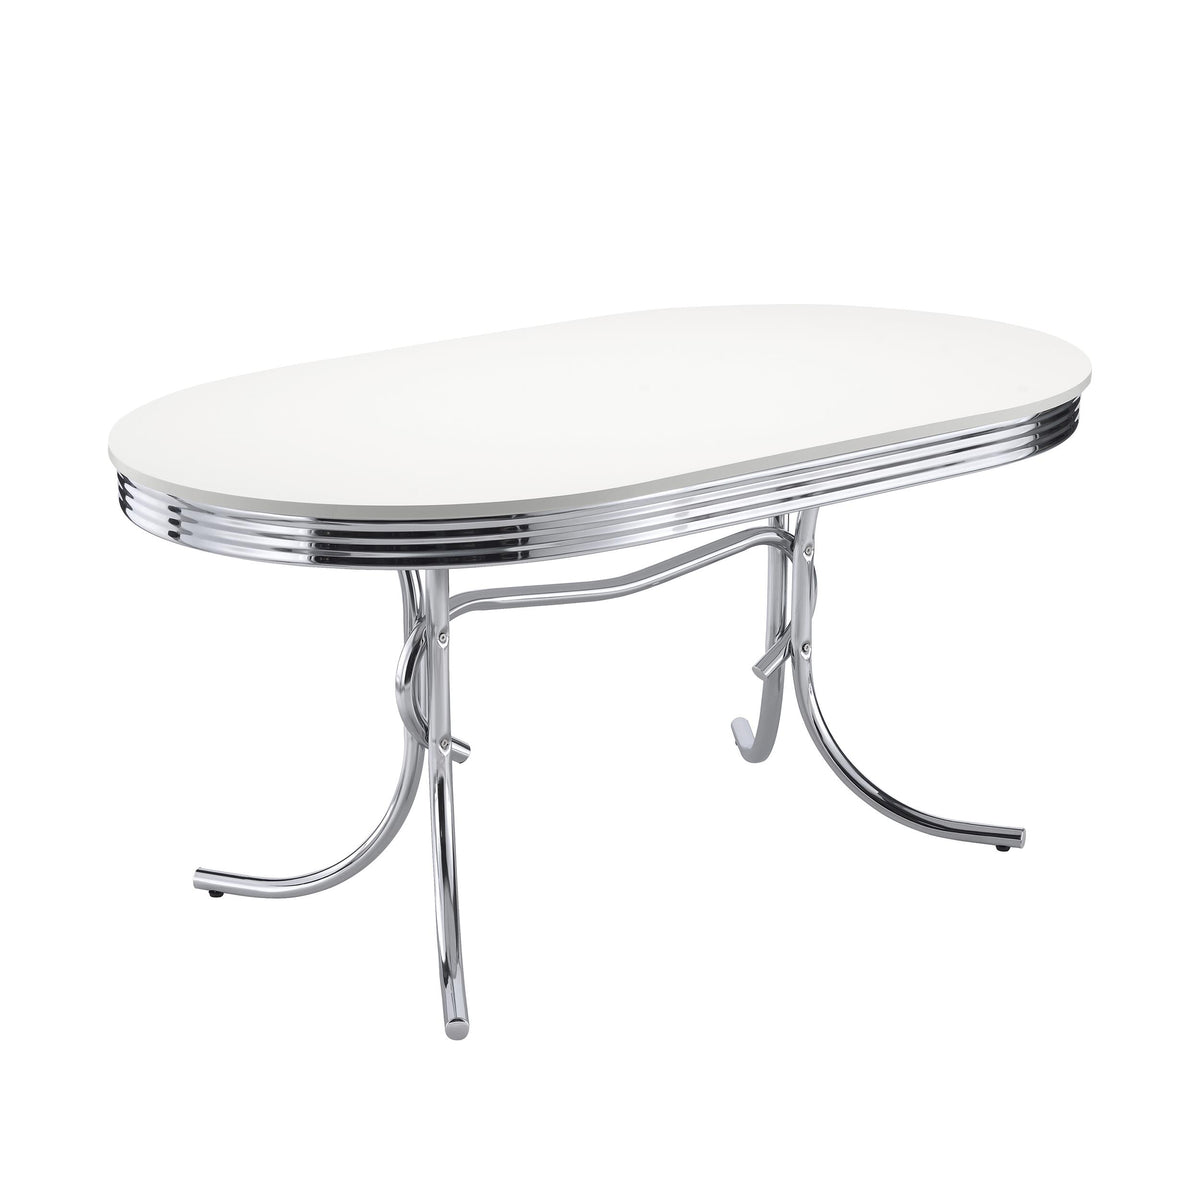 Retro Oval Dining Table Glossy White and Chrome  Half Price Furniture